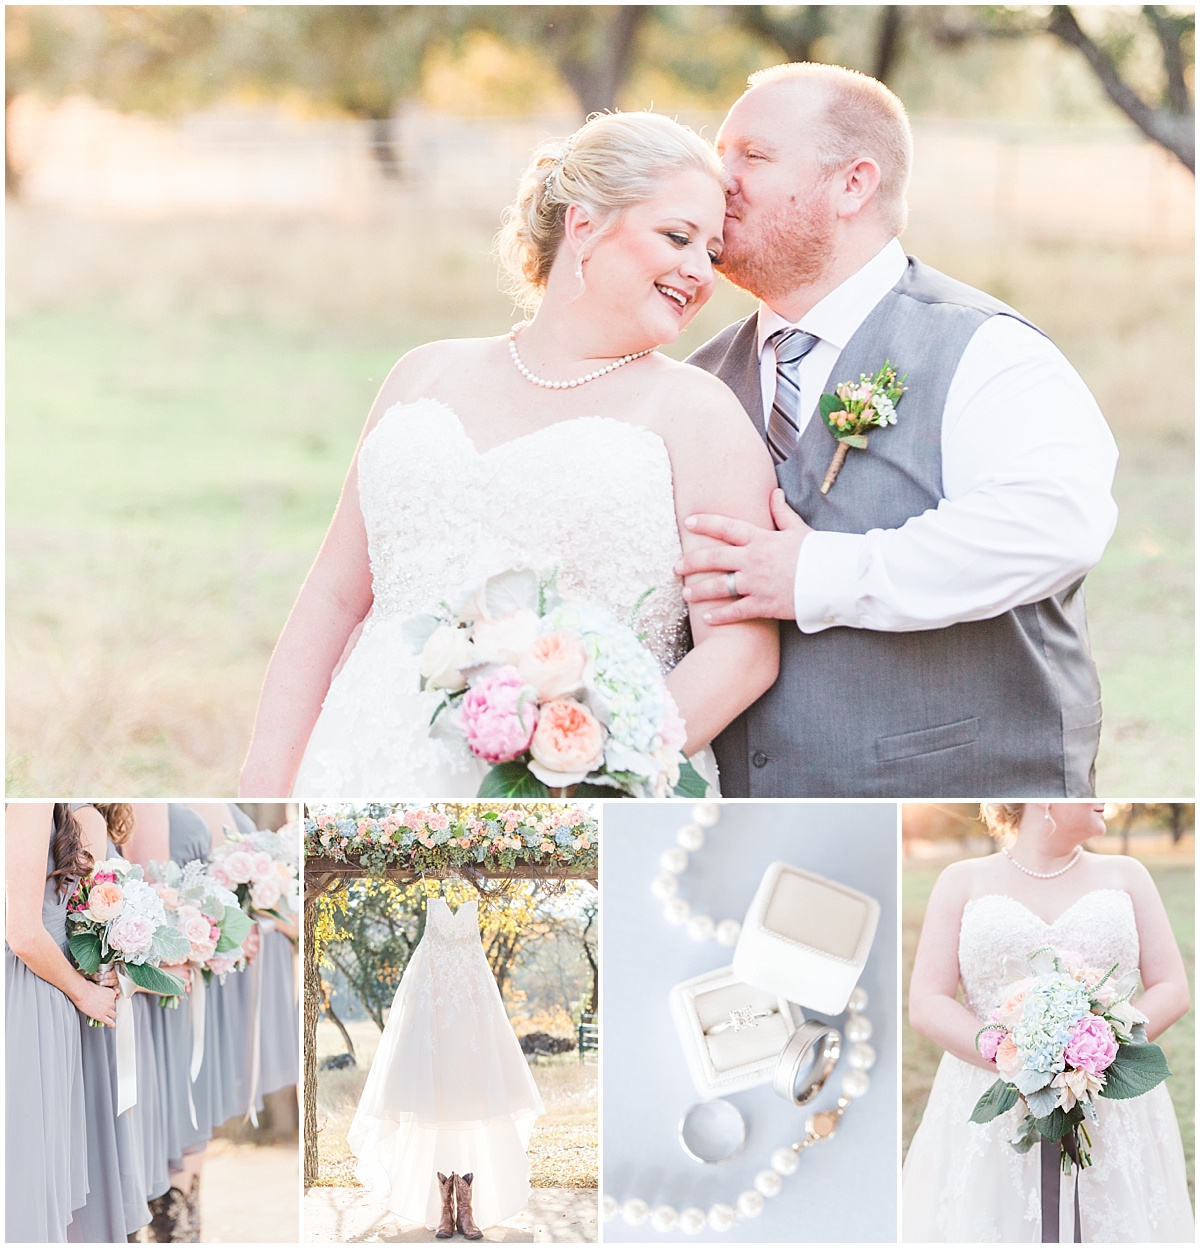 a-slate-blue-and-grey-winter-wedding-at-cw-hill-country-ranch-in-boerne-texas-by-allison-jeffers-wedding-photography_0149